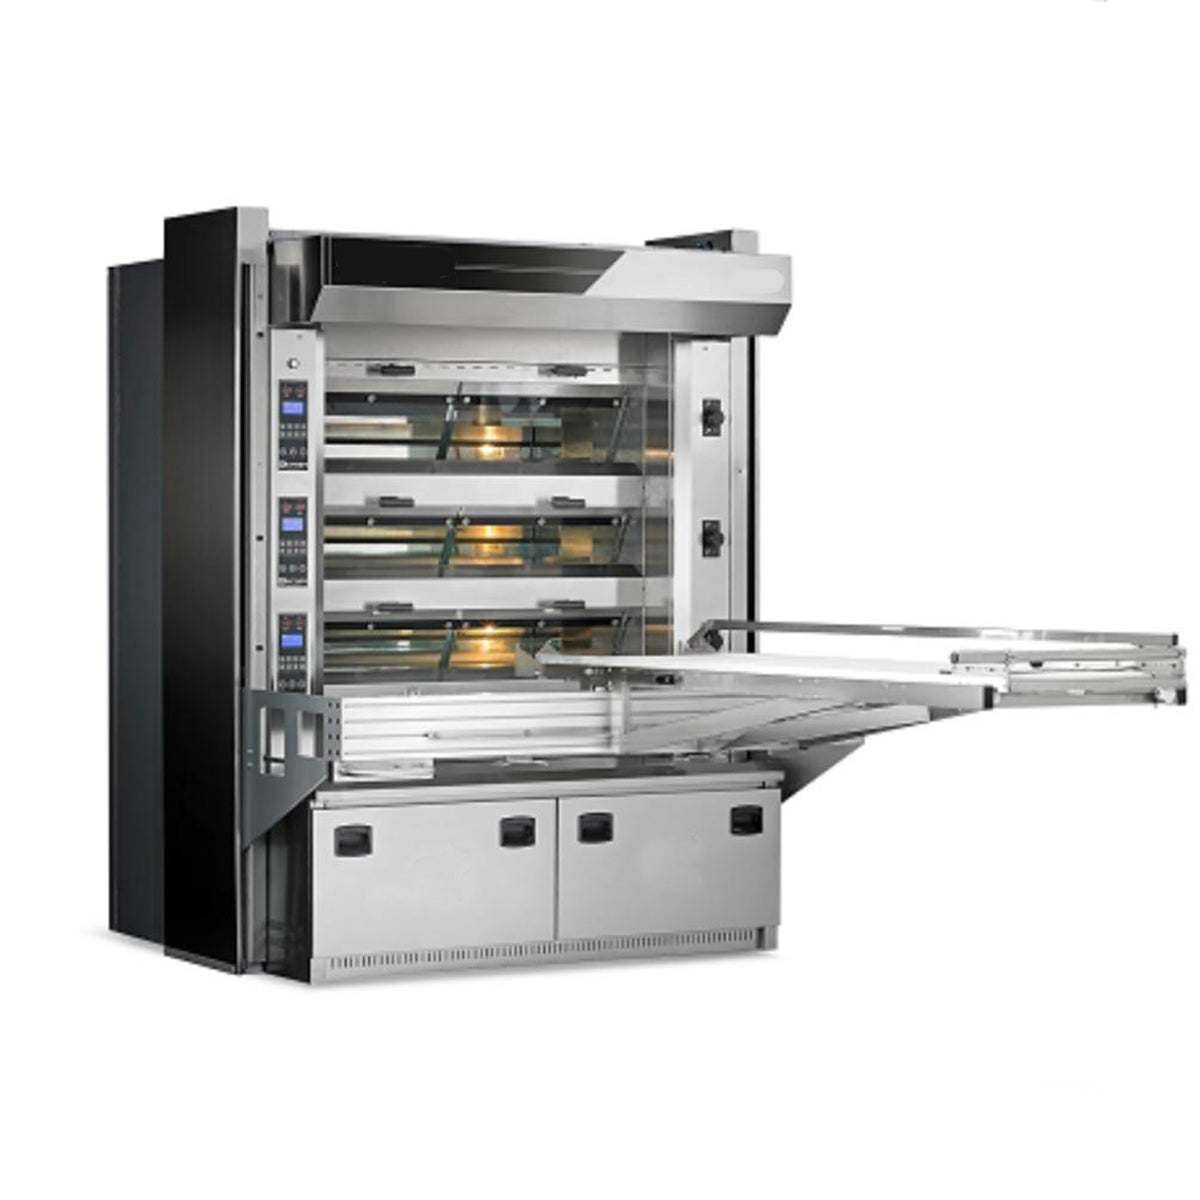 Commercial bakery ovens: Italian quality for your bakery